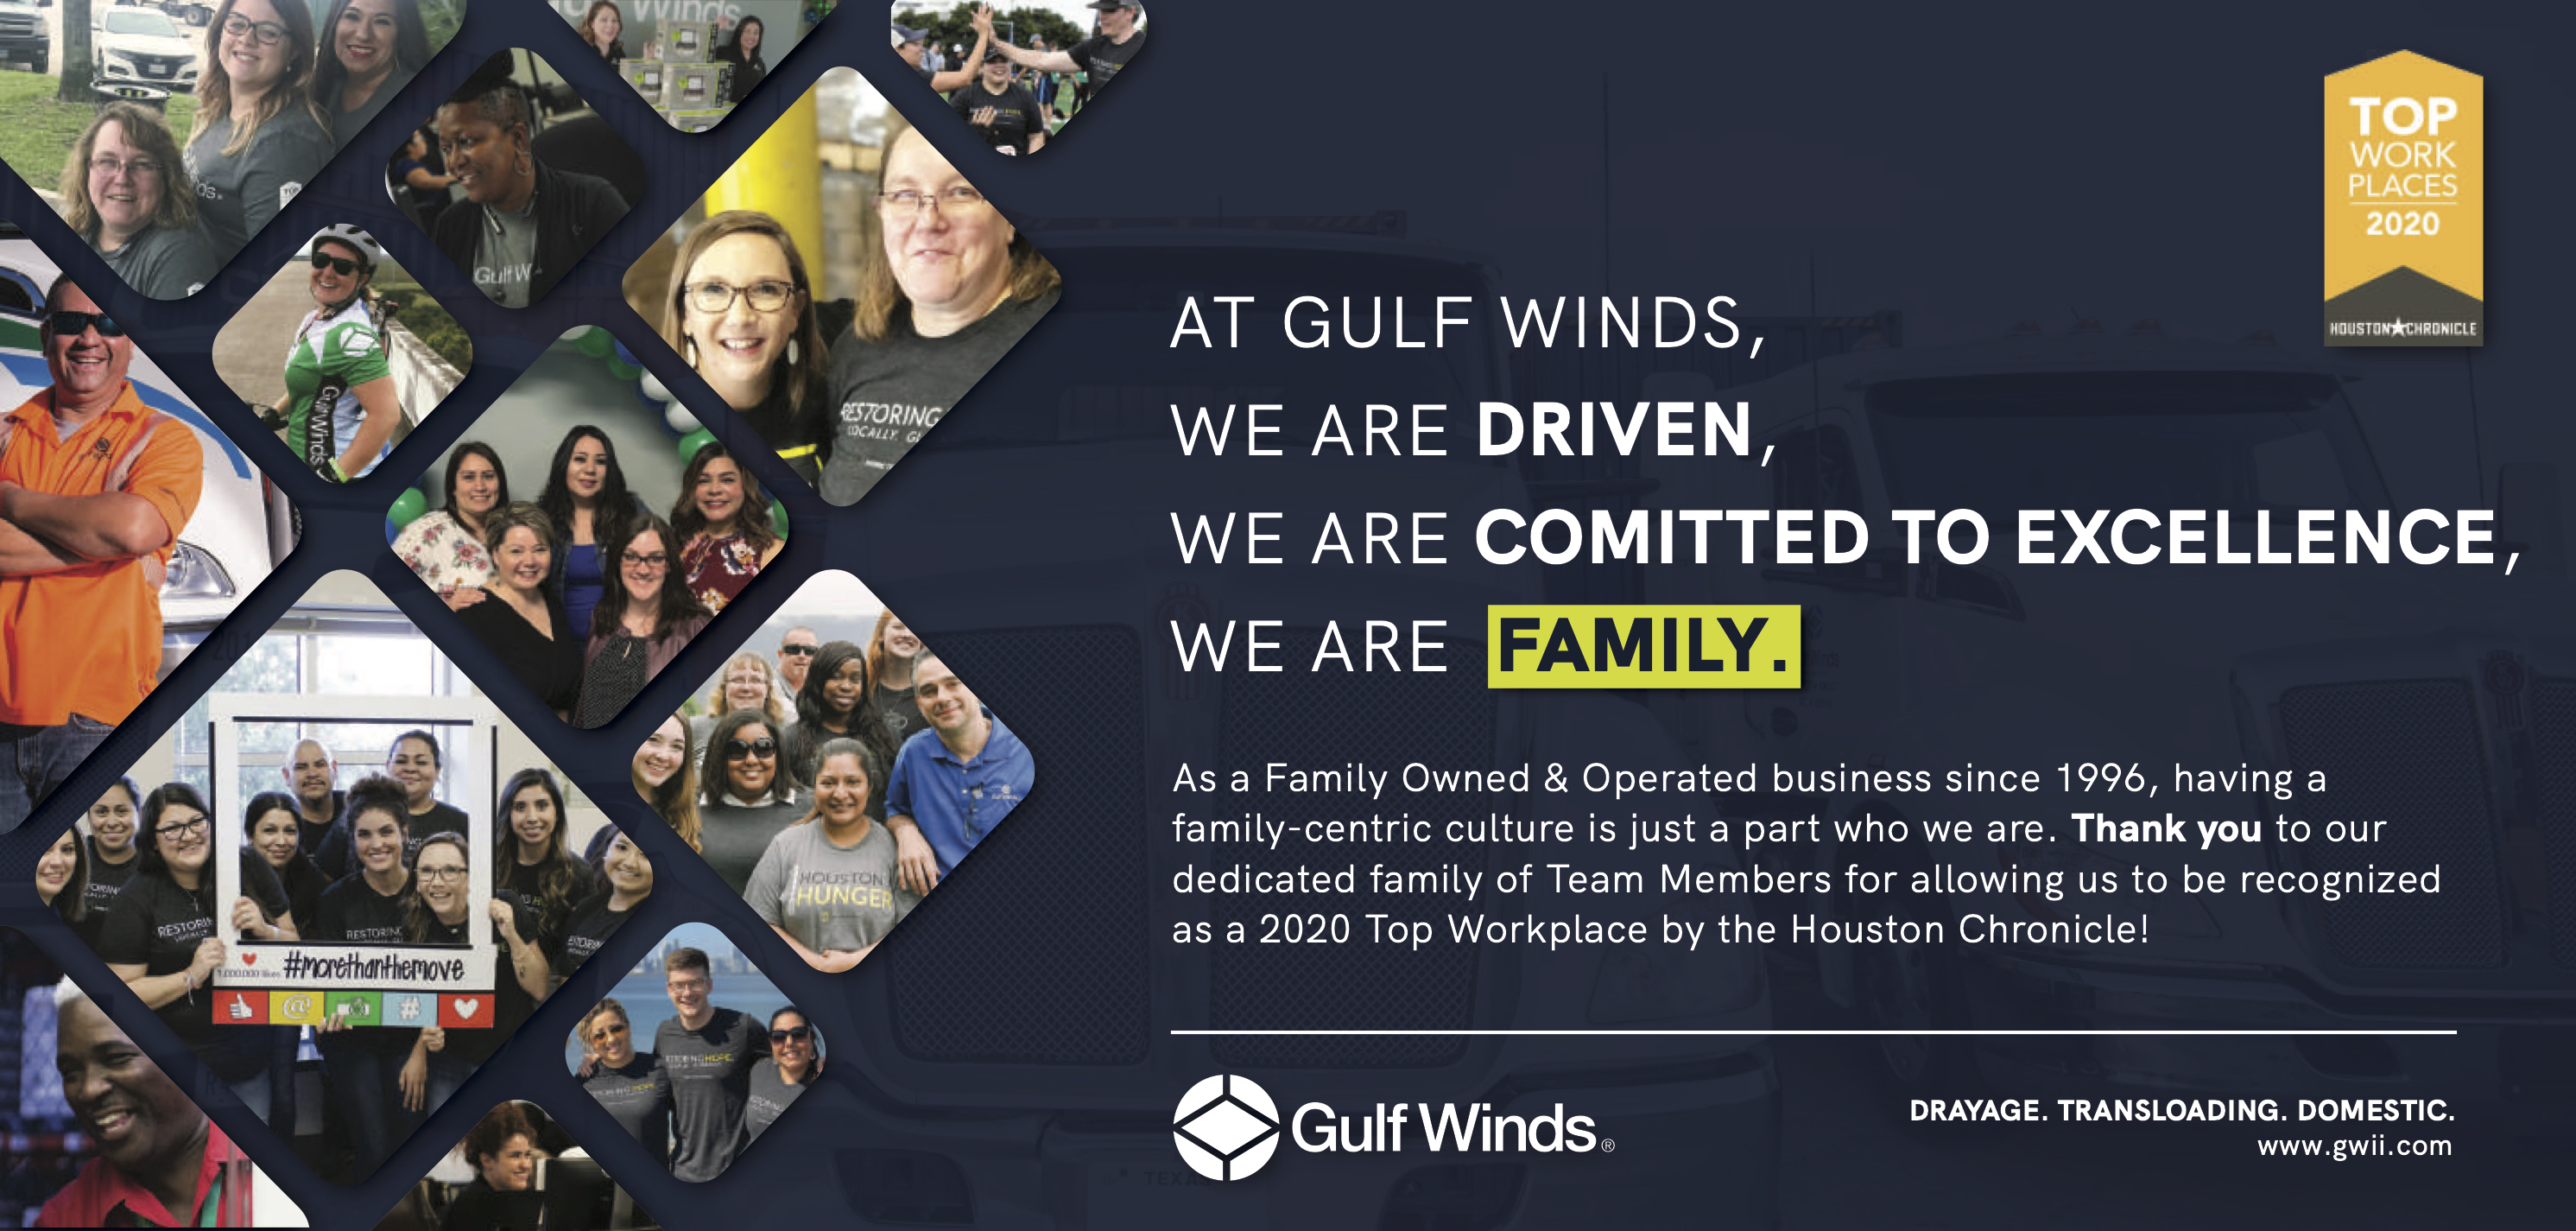 Gulf Winds International Recognized as a Top Workplace by the Houston Chronicle